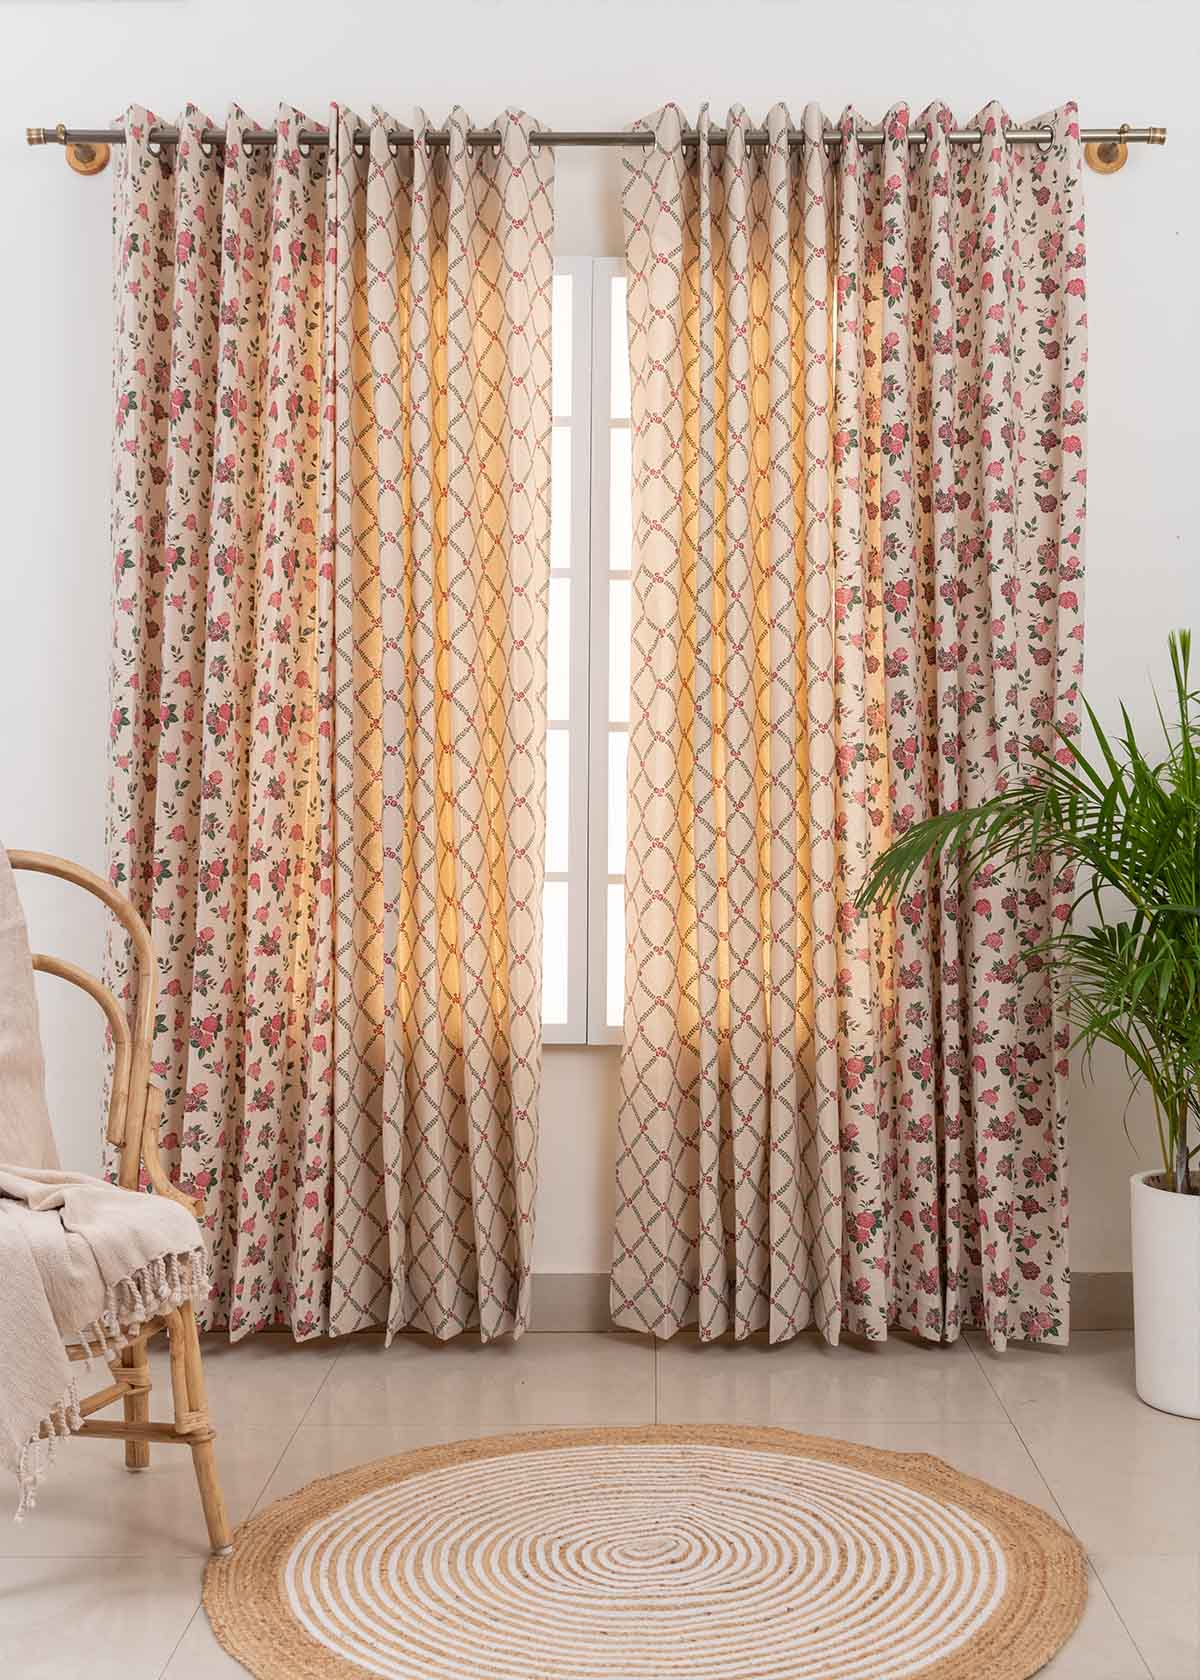 Wild Roses, Climbing Roses Set Of 4 Combo Cotton Curtain - Wine Red